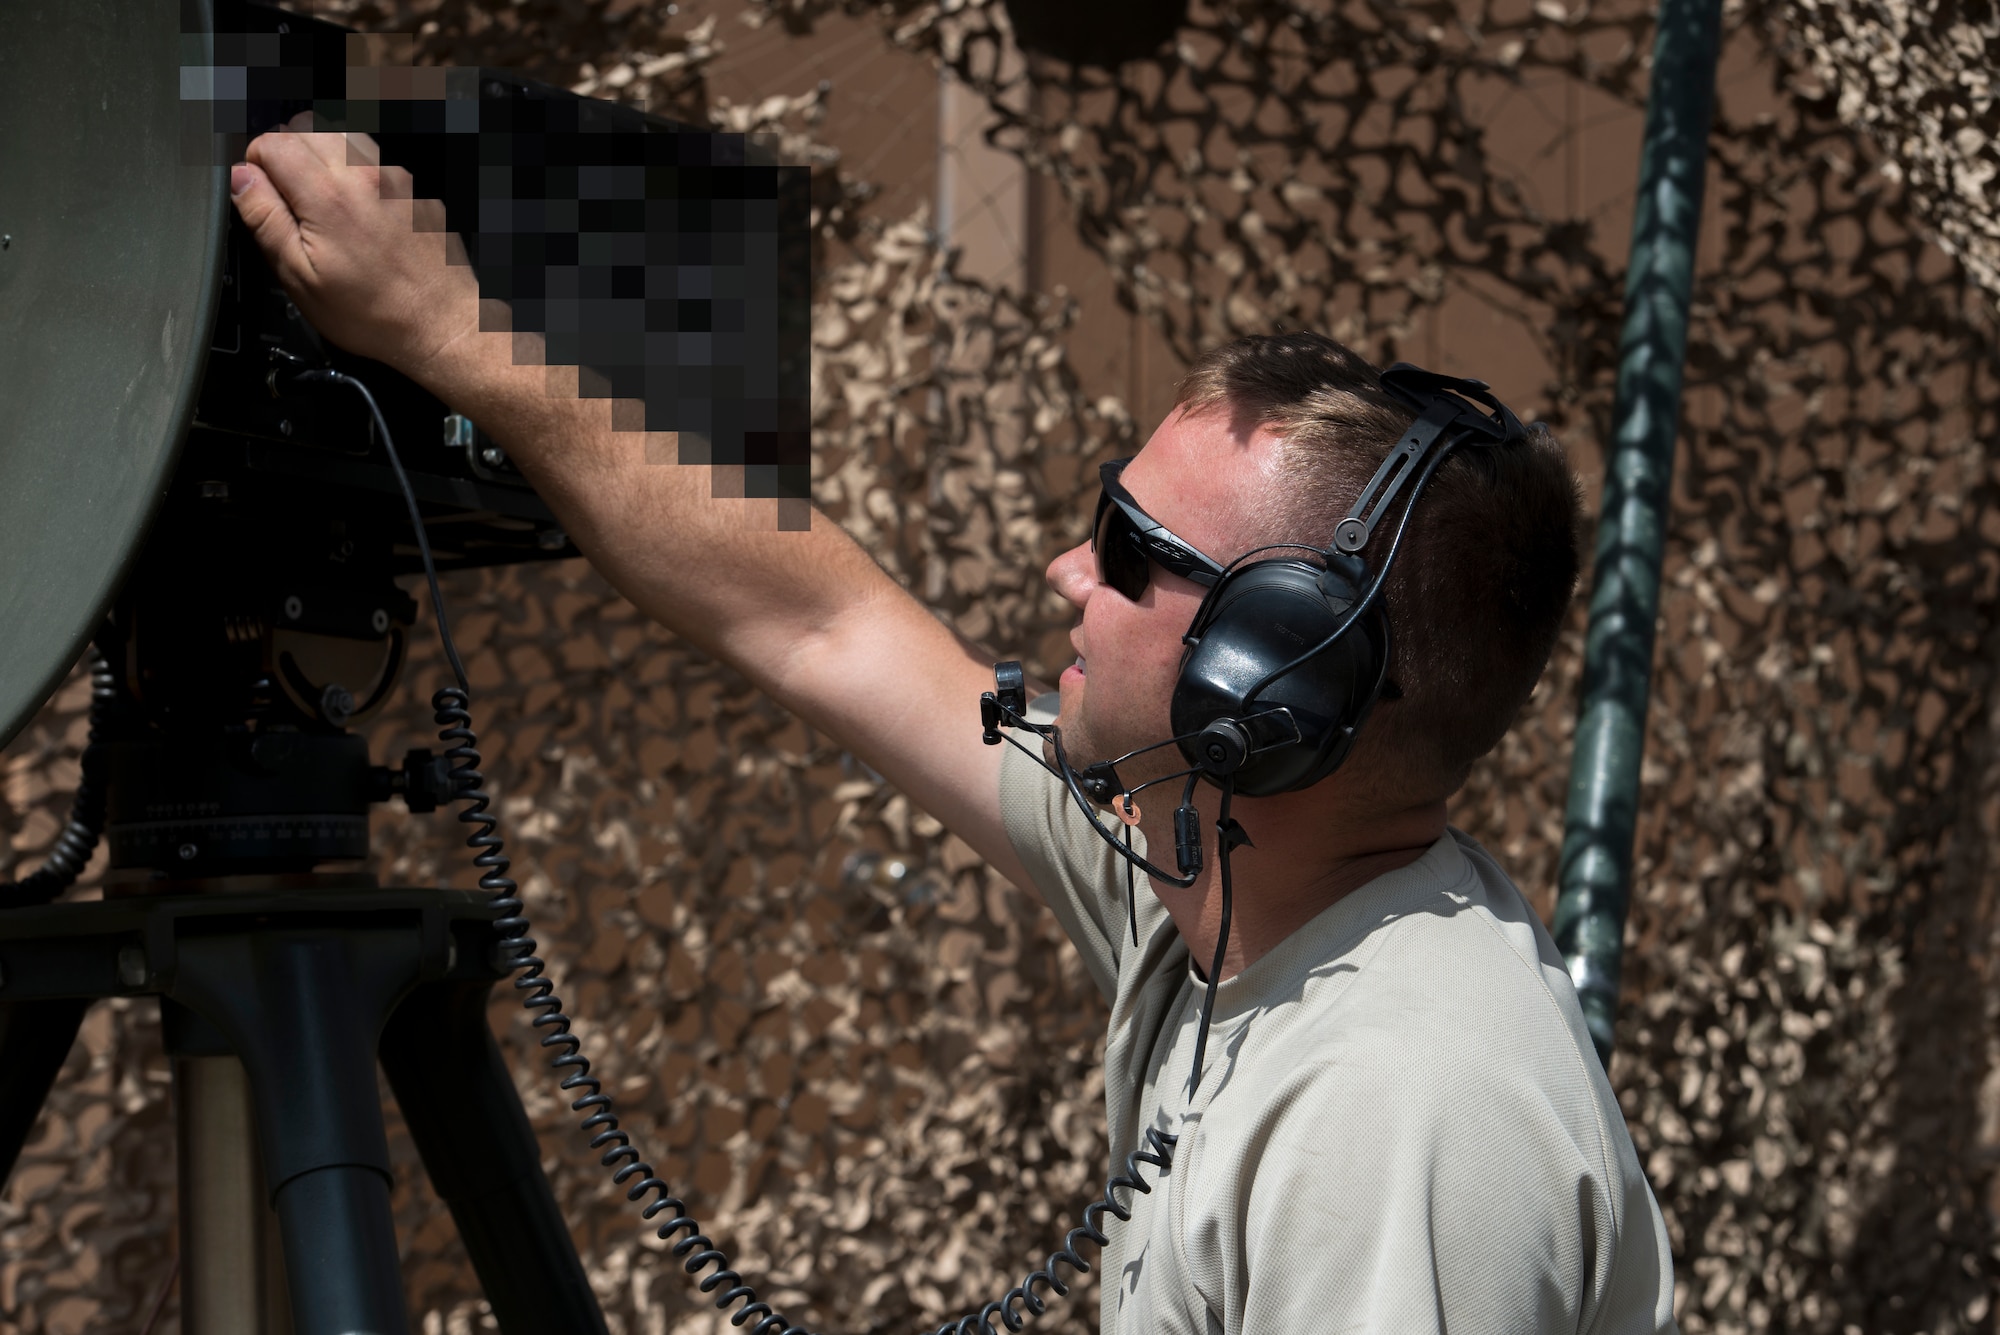 Senior Airman Jordan Jones, 726th Air Control Squadron radio frequency (RF) transmission systems technician, communicates using a Tropo Satellite Support Radio (TSSR) July 16, 2019, at Mountain Home Air Force Base, Idaho. Jones’s job is maintaining, troubleshooting, and repairing deployable communication equipment. The TSSR was blurred due to potential security risks. (U.S. Air Force photo by Senior Airman JaNae Capuno)